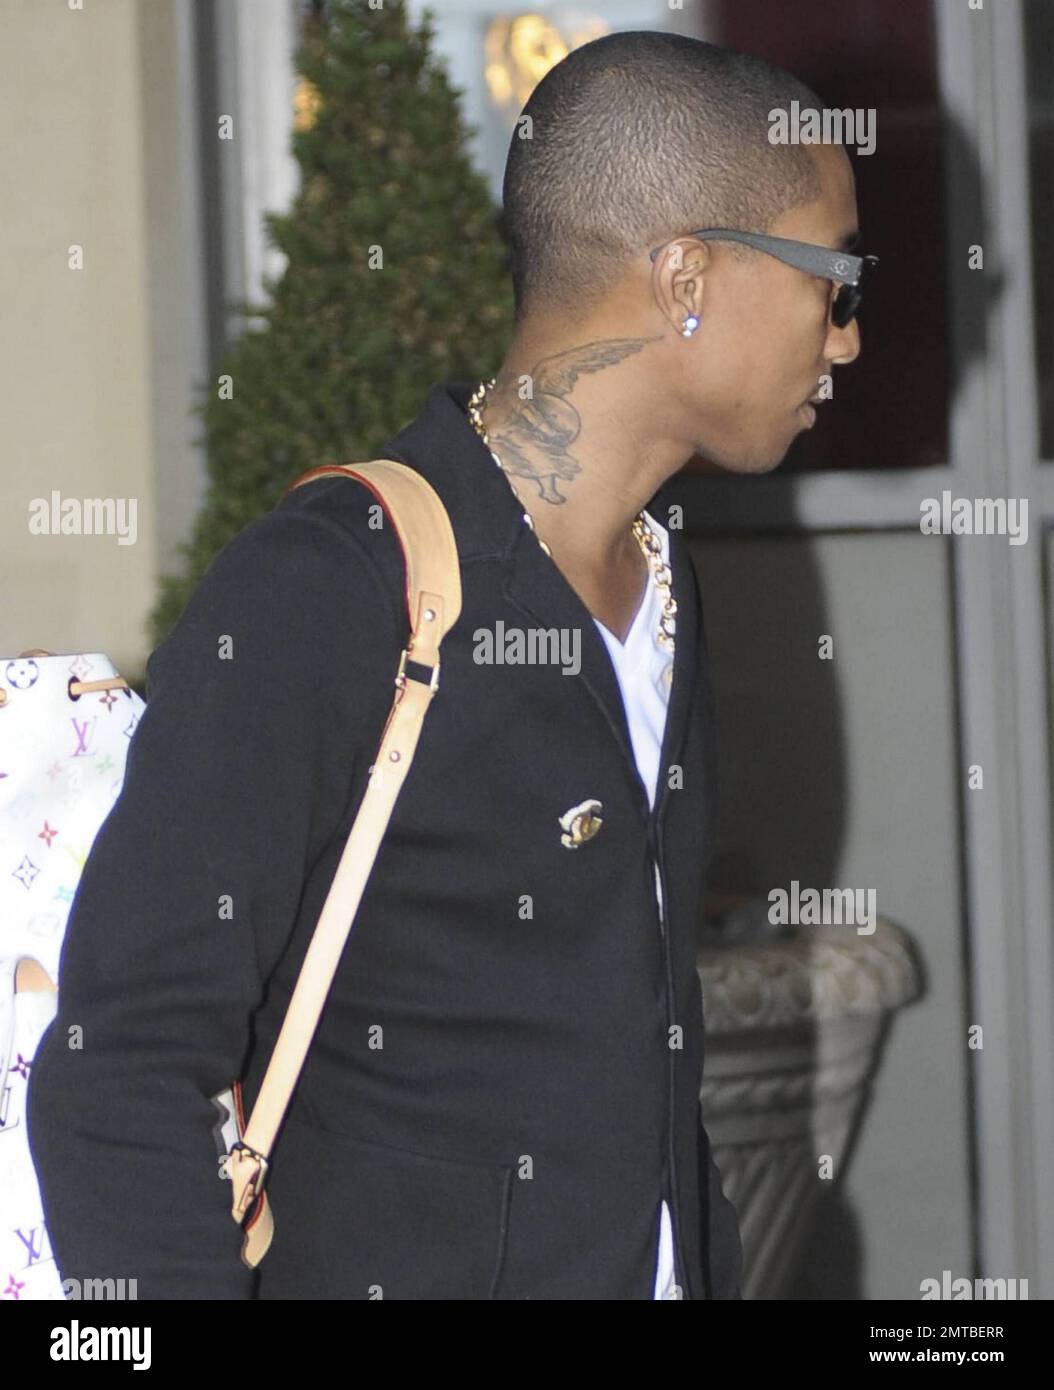 American musician Pharrell Williams of the hip hop and funk band